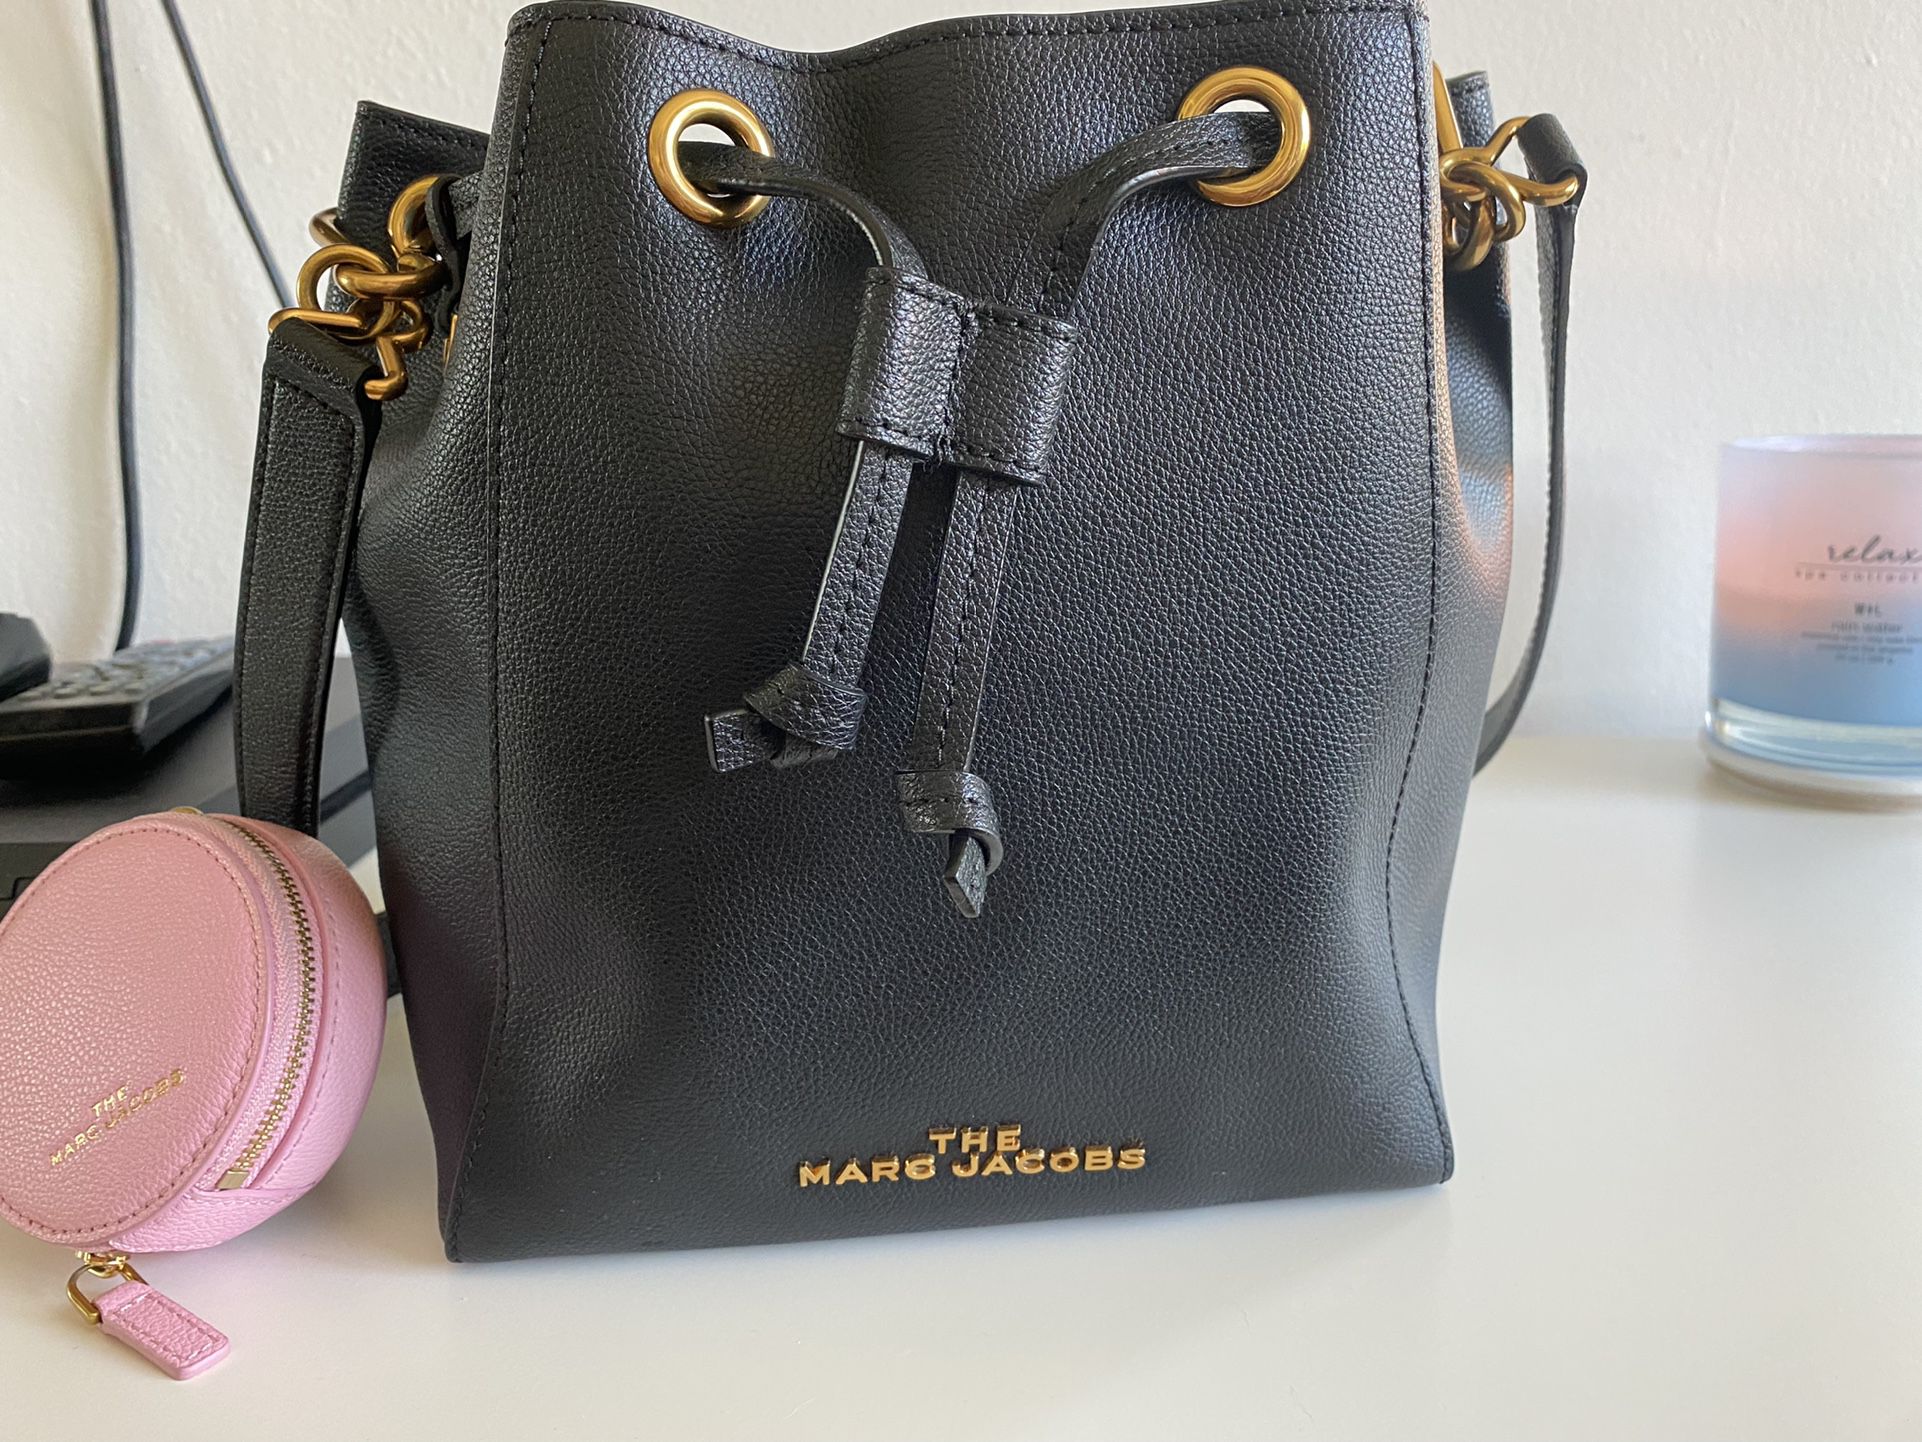 MARC JACOBS BUCKET BAG WITH PINK COIN PURSE